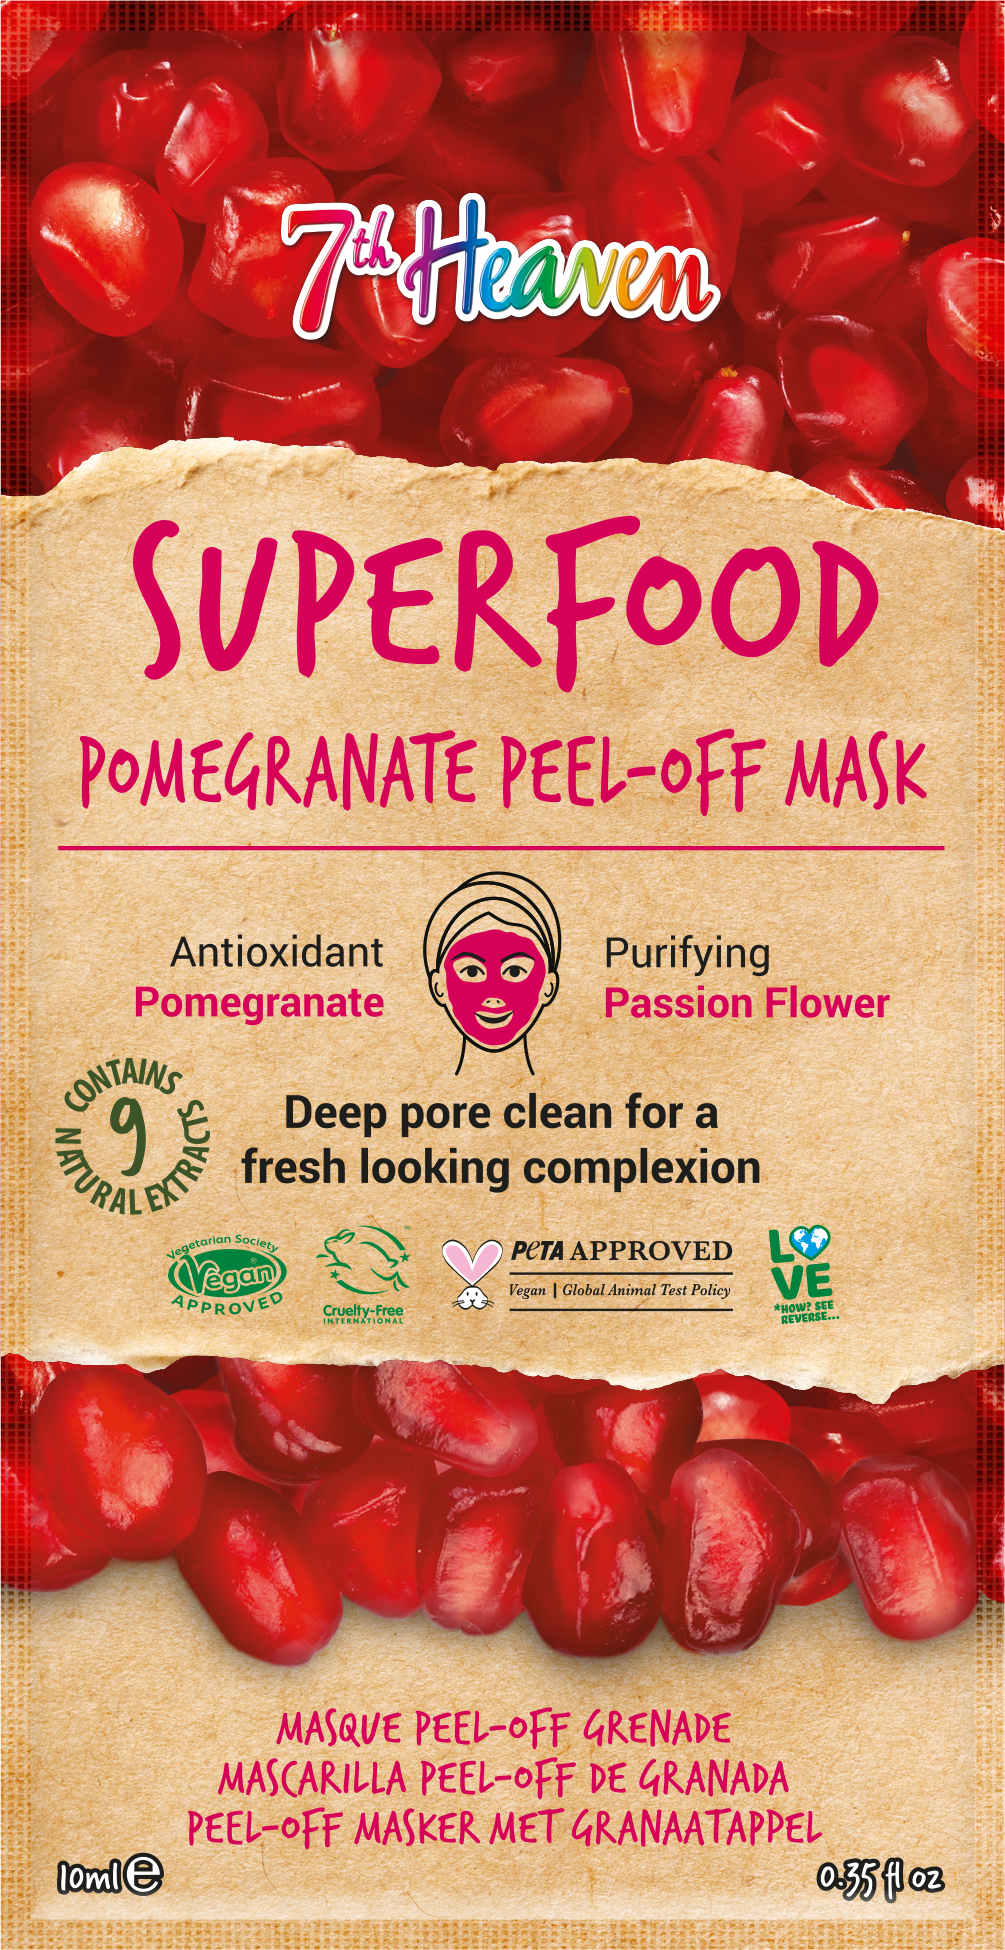 7th Heaven Superfood Pomegranate Peel-Off Mask with Passion flower extract